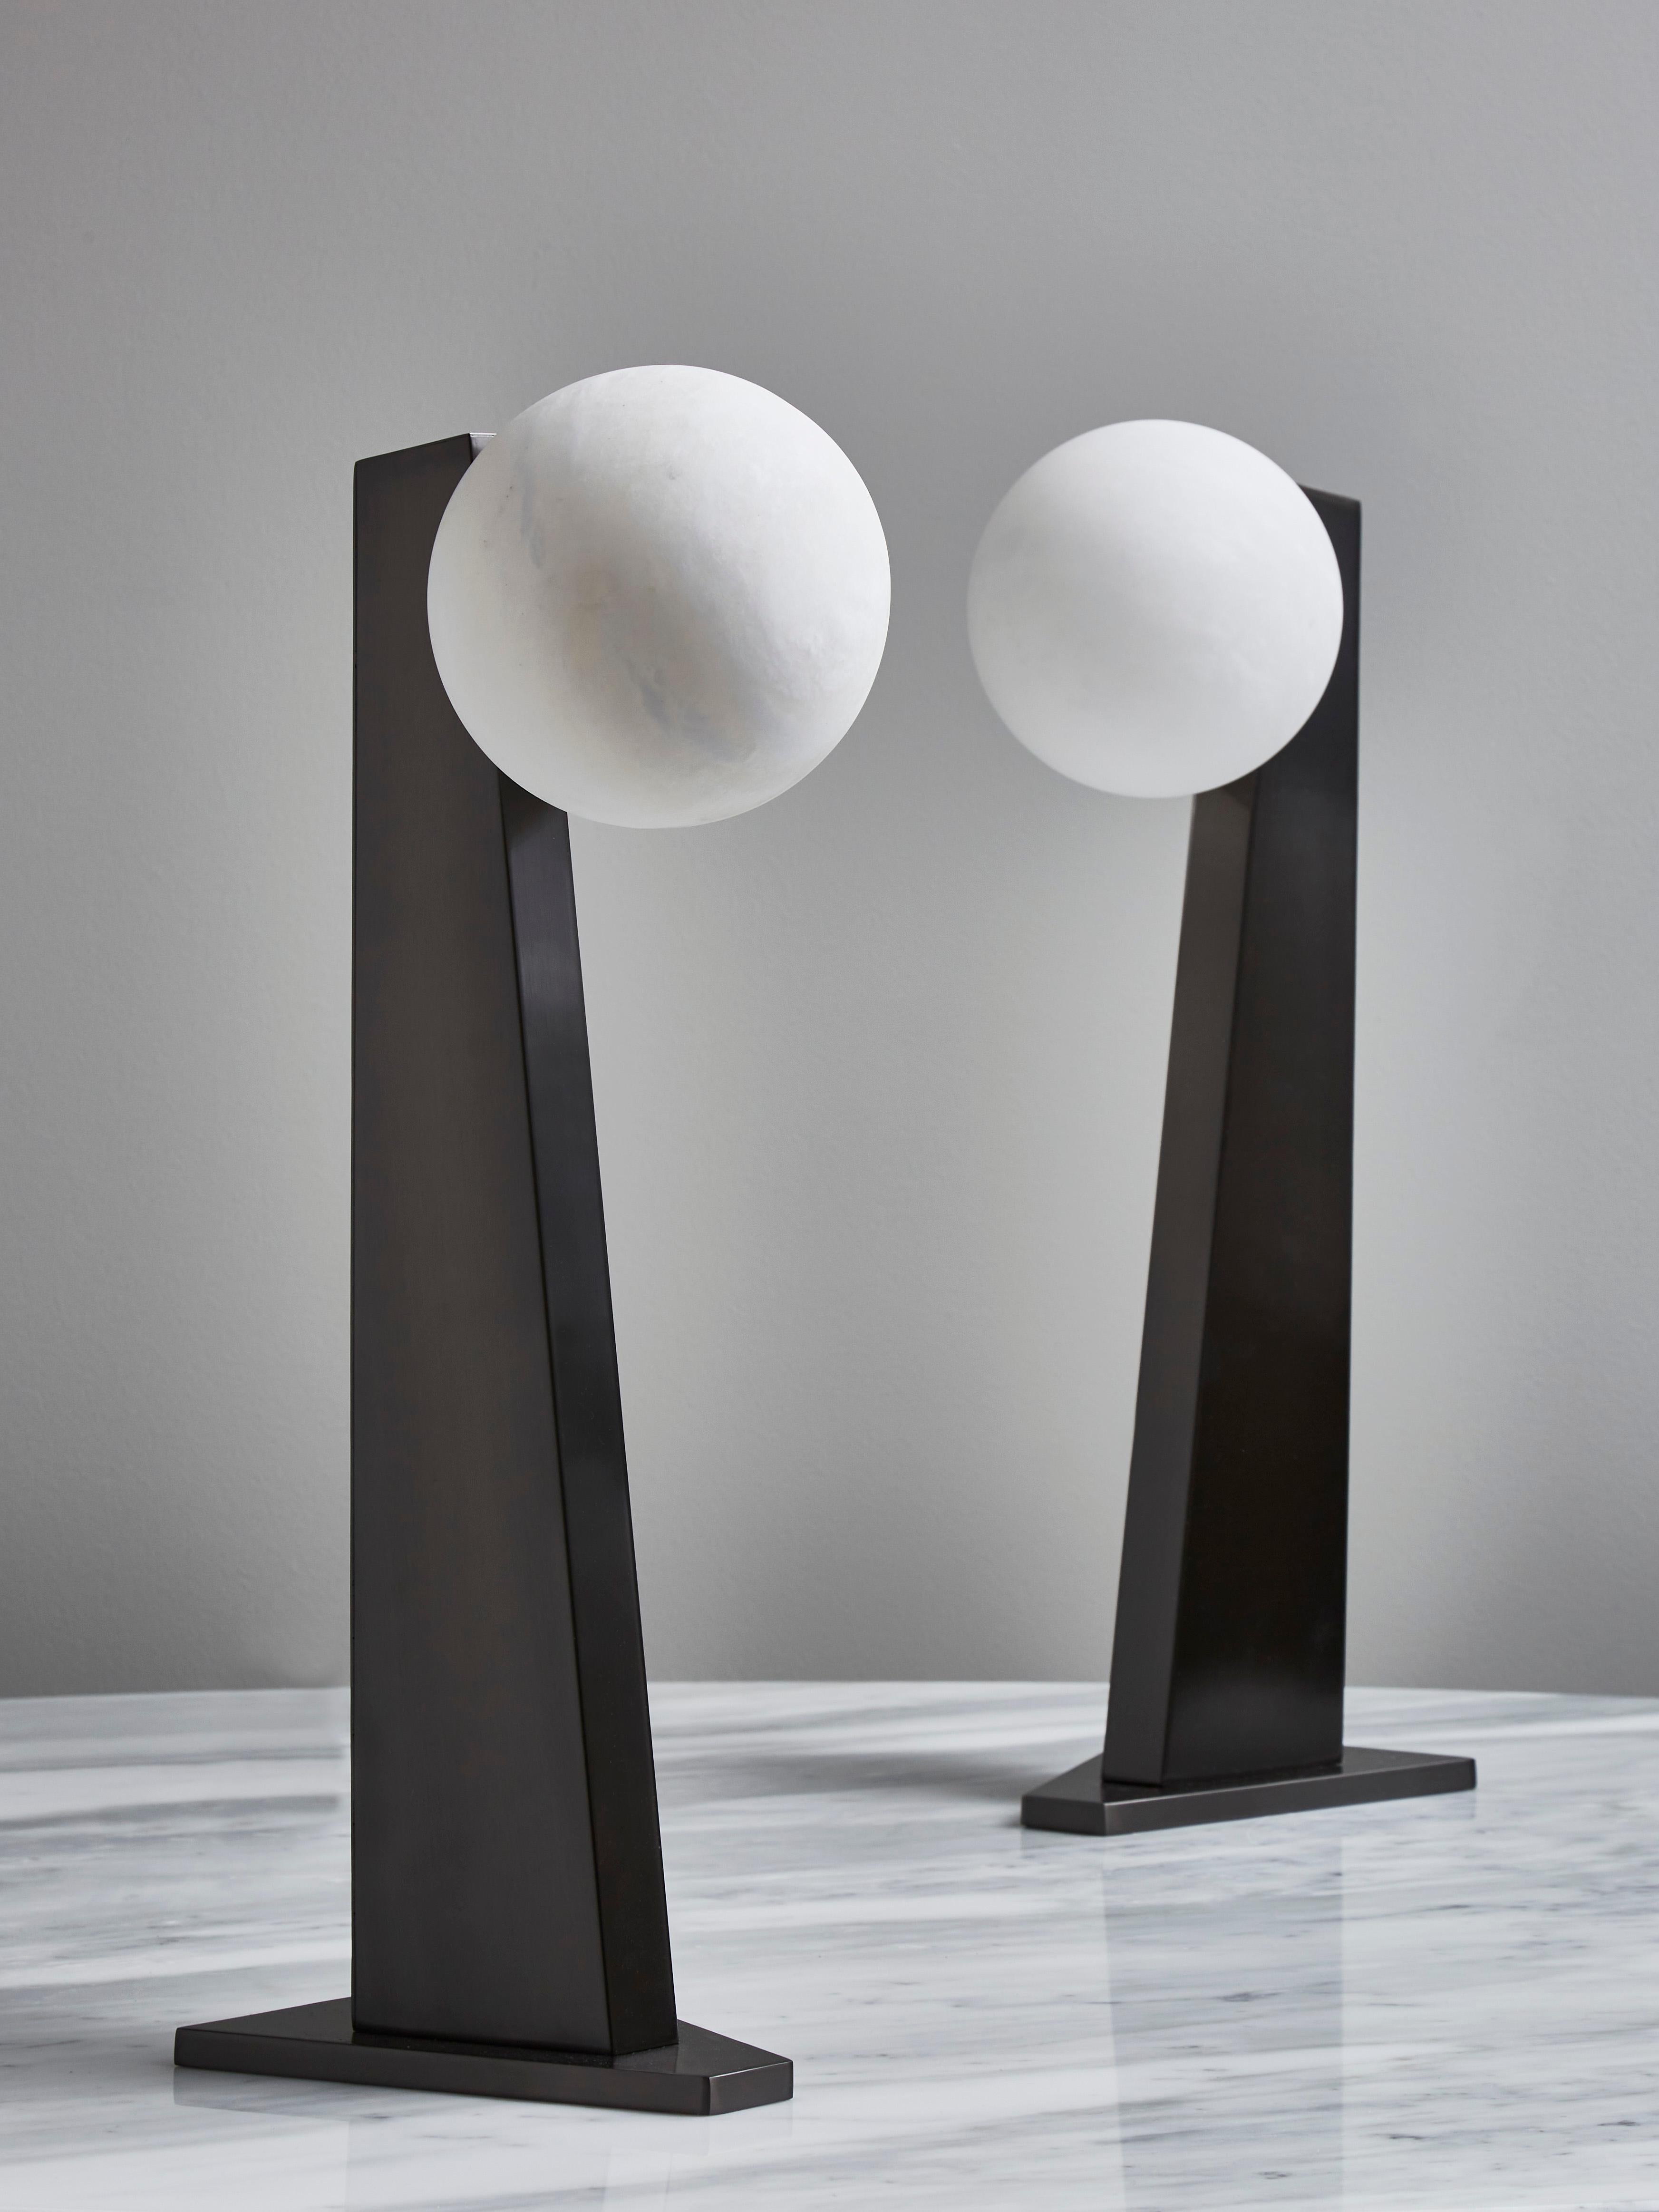 Table lamp version of our popular floor lamp, asymmetrical brass foot in black nickel satin finish holding a single alabaster globe.

Designed by Glustin Luminaires

Price displayed per table lamp.